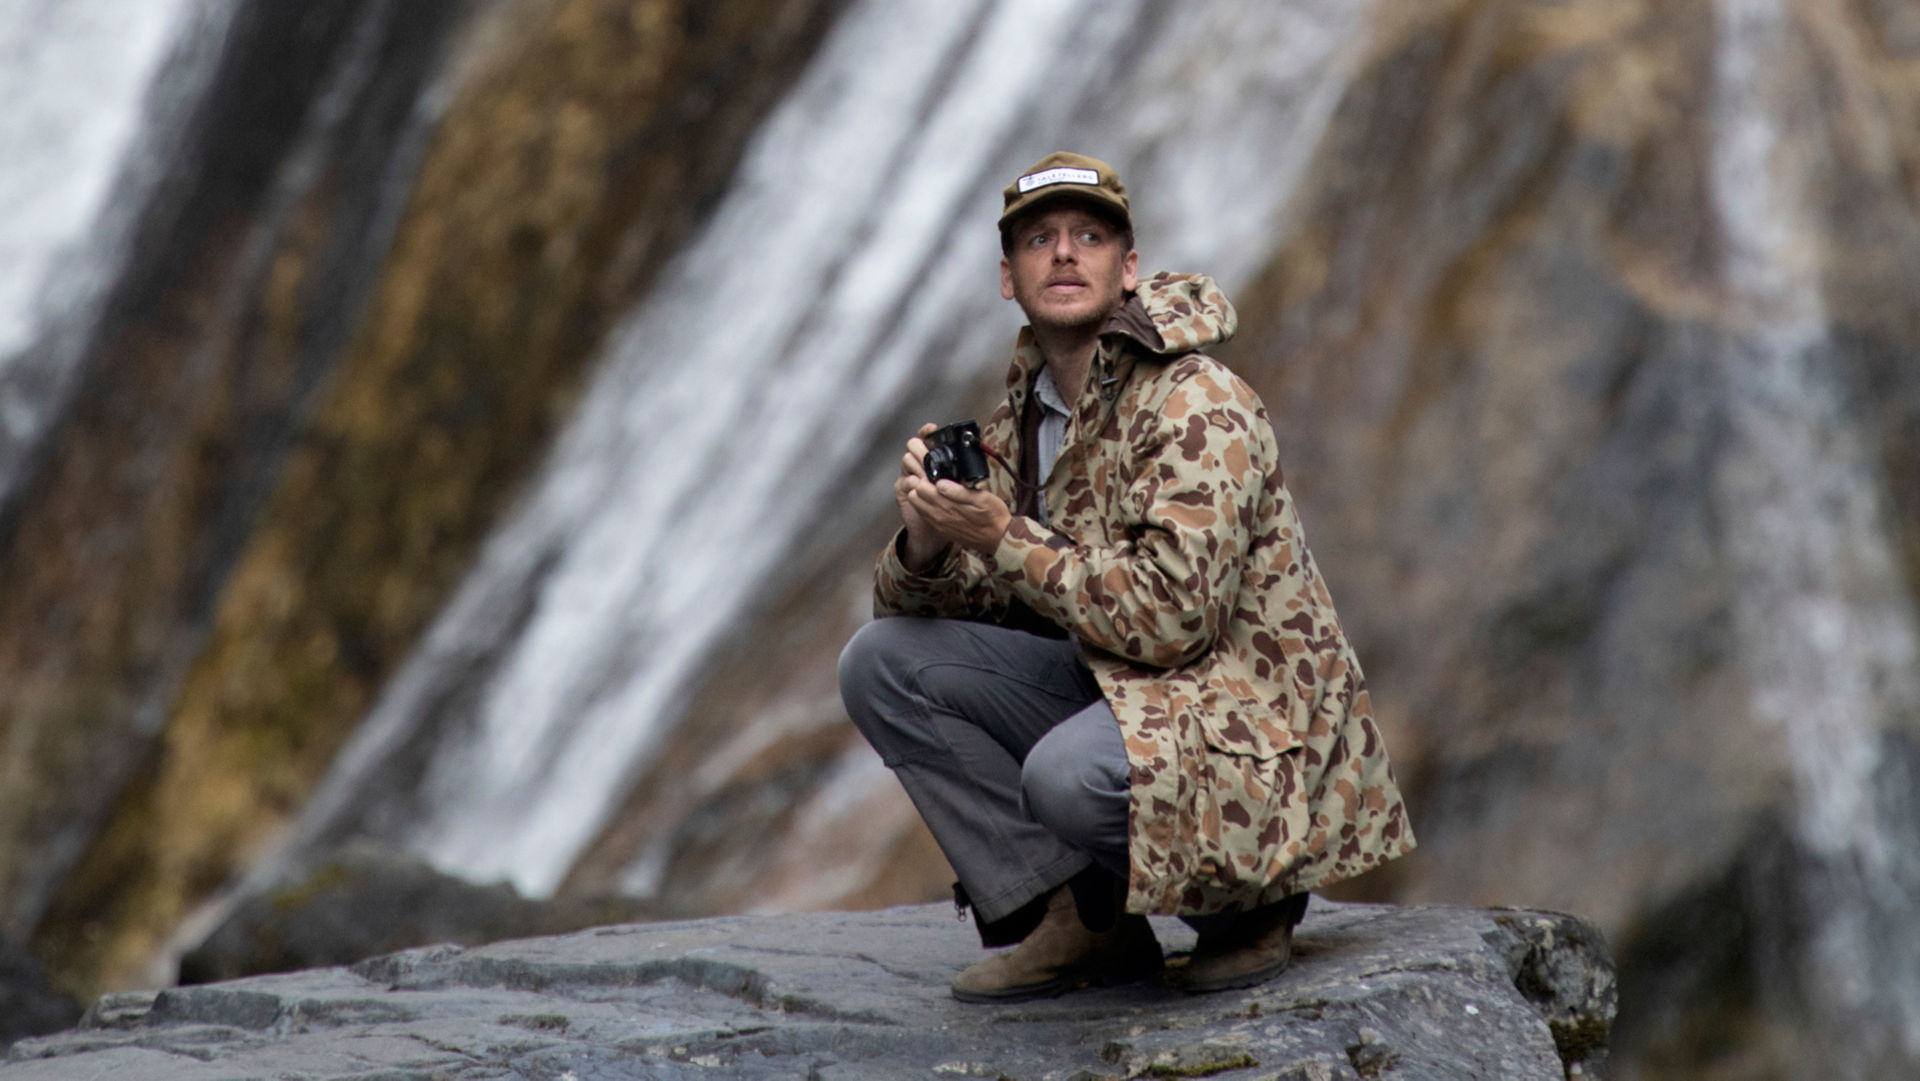 A man in a '71 Camo Jacket squats on a rock in the mountains with a camera in his hand